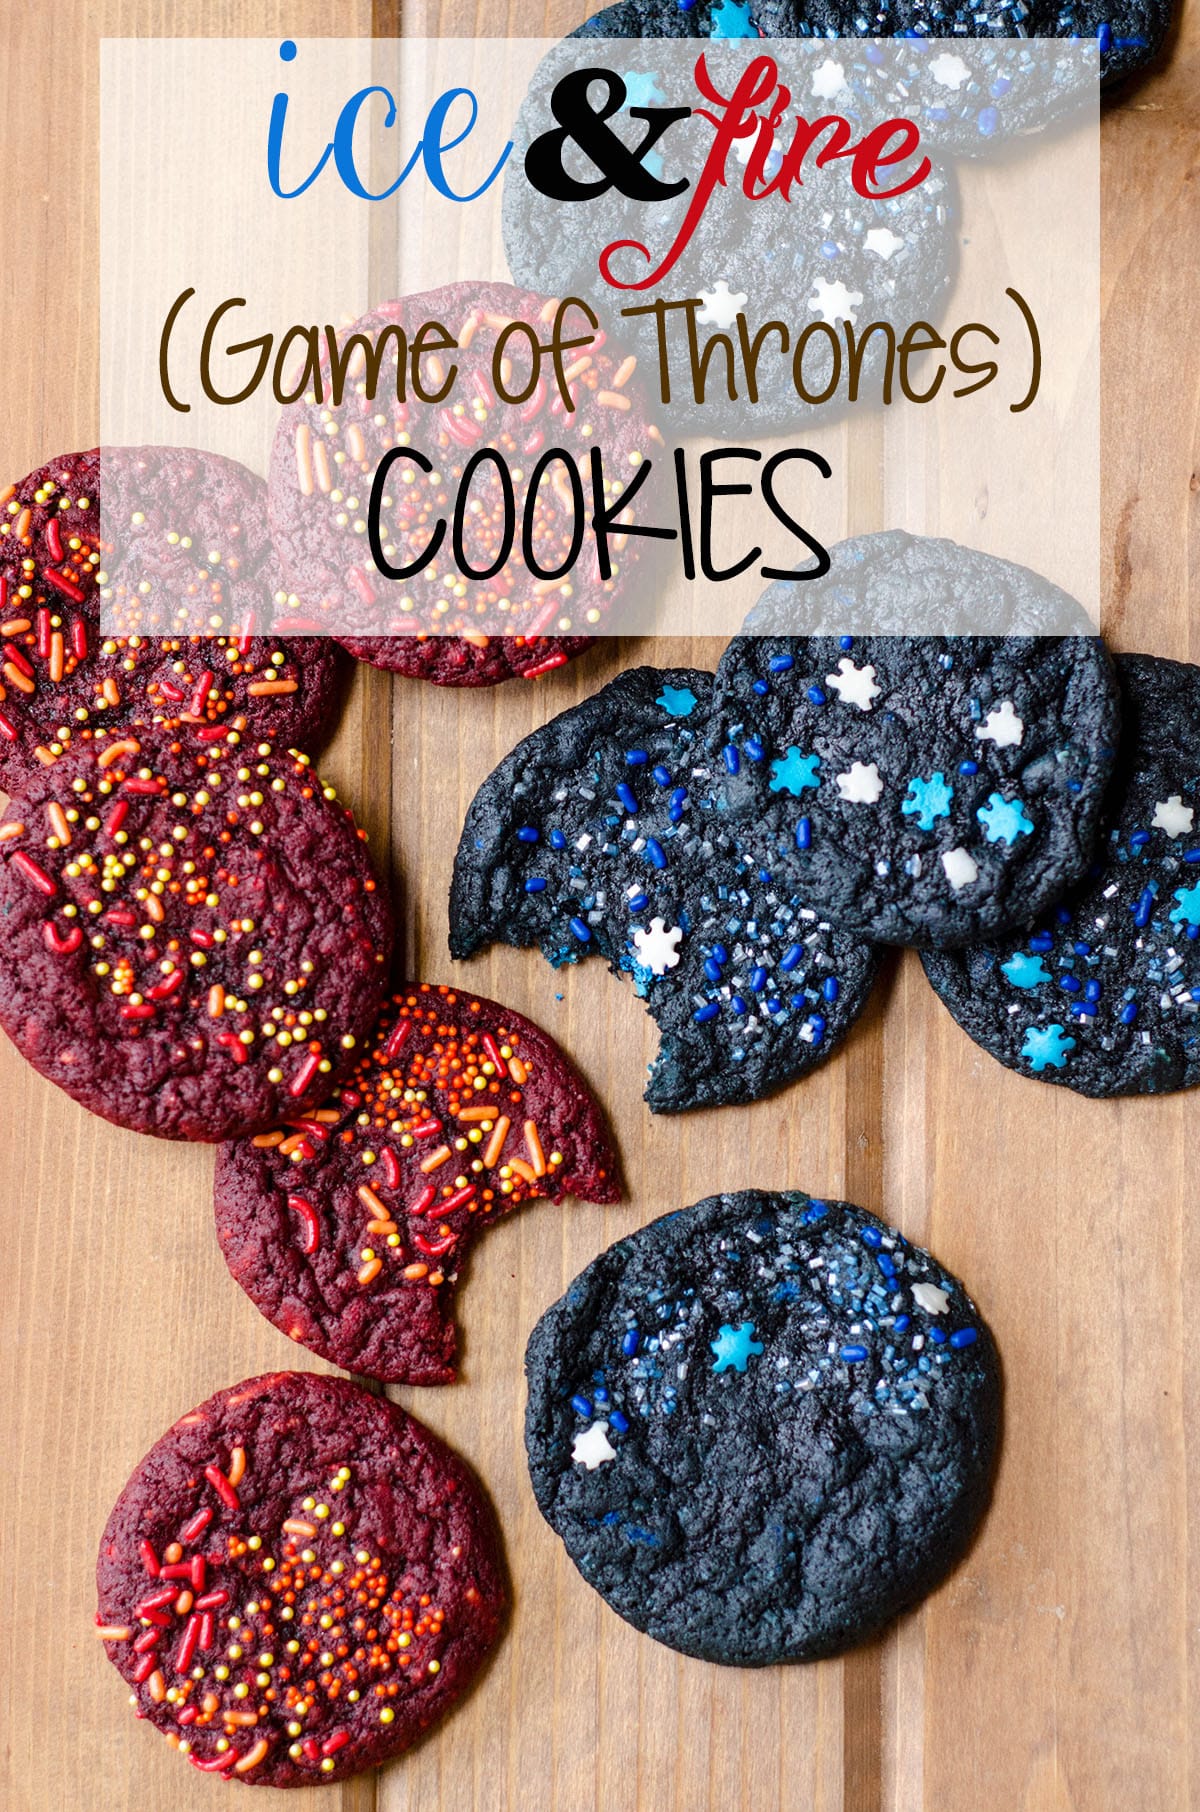 Ice & Fire (Game of Thrones) Cookies: Easy red and blue velvet cookies donned with icy and firey sprinkles.  via @frshaprilflours